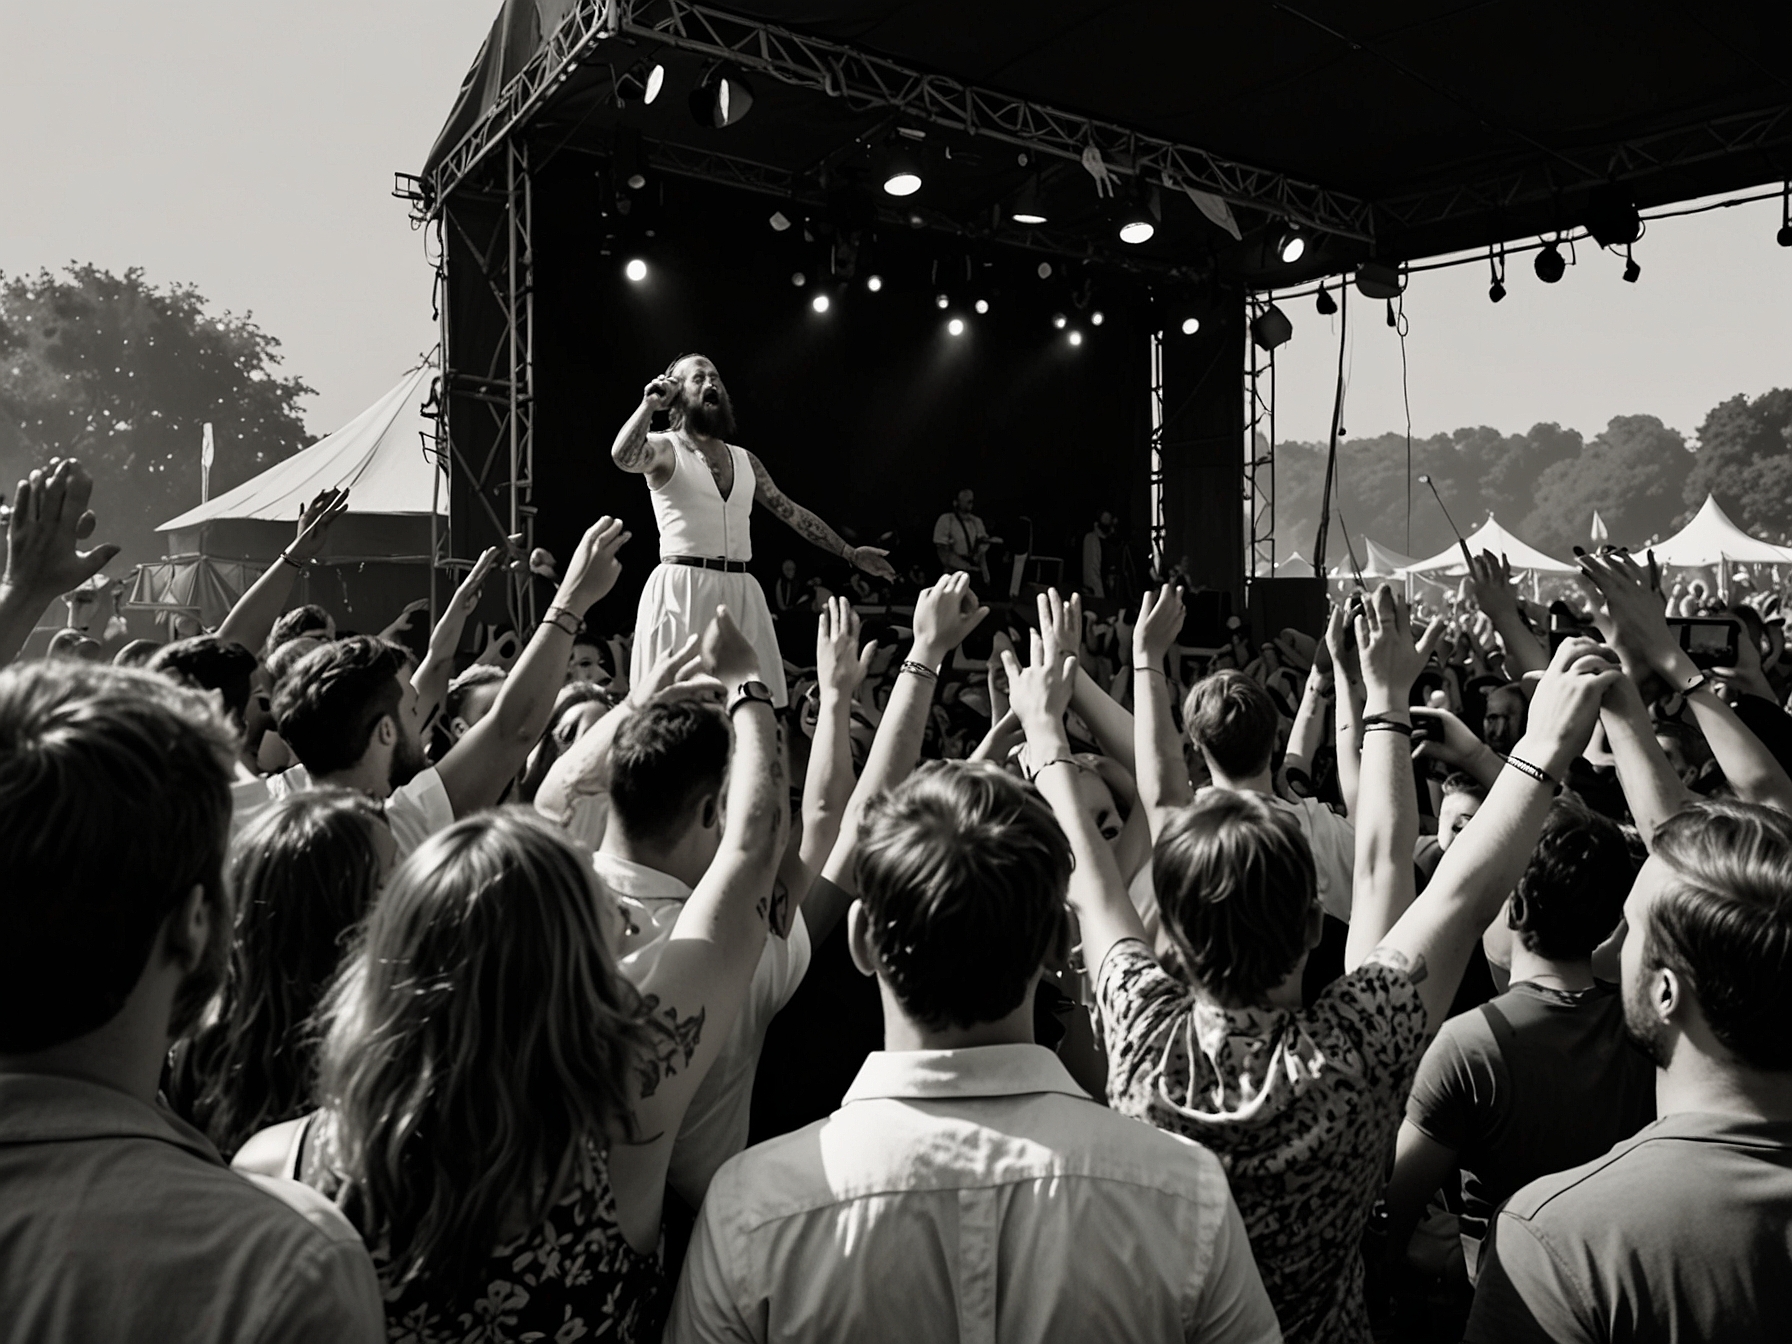 IDLES perform on the Other Stage at Glastonbury with a crowd of festival-goers. The image captures the intense energy and raw emotion of the band's performance.